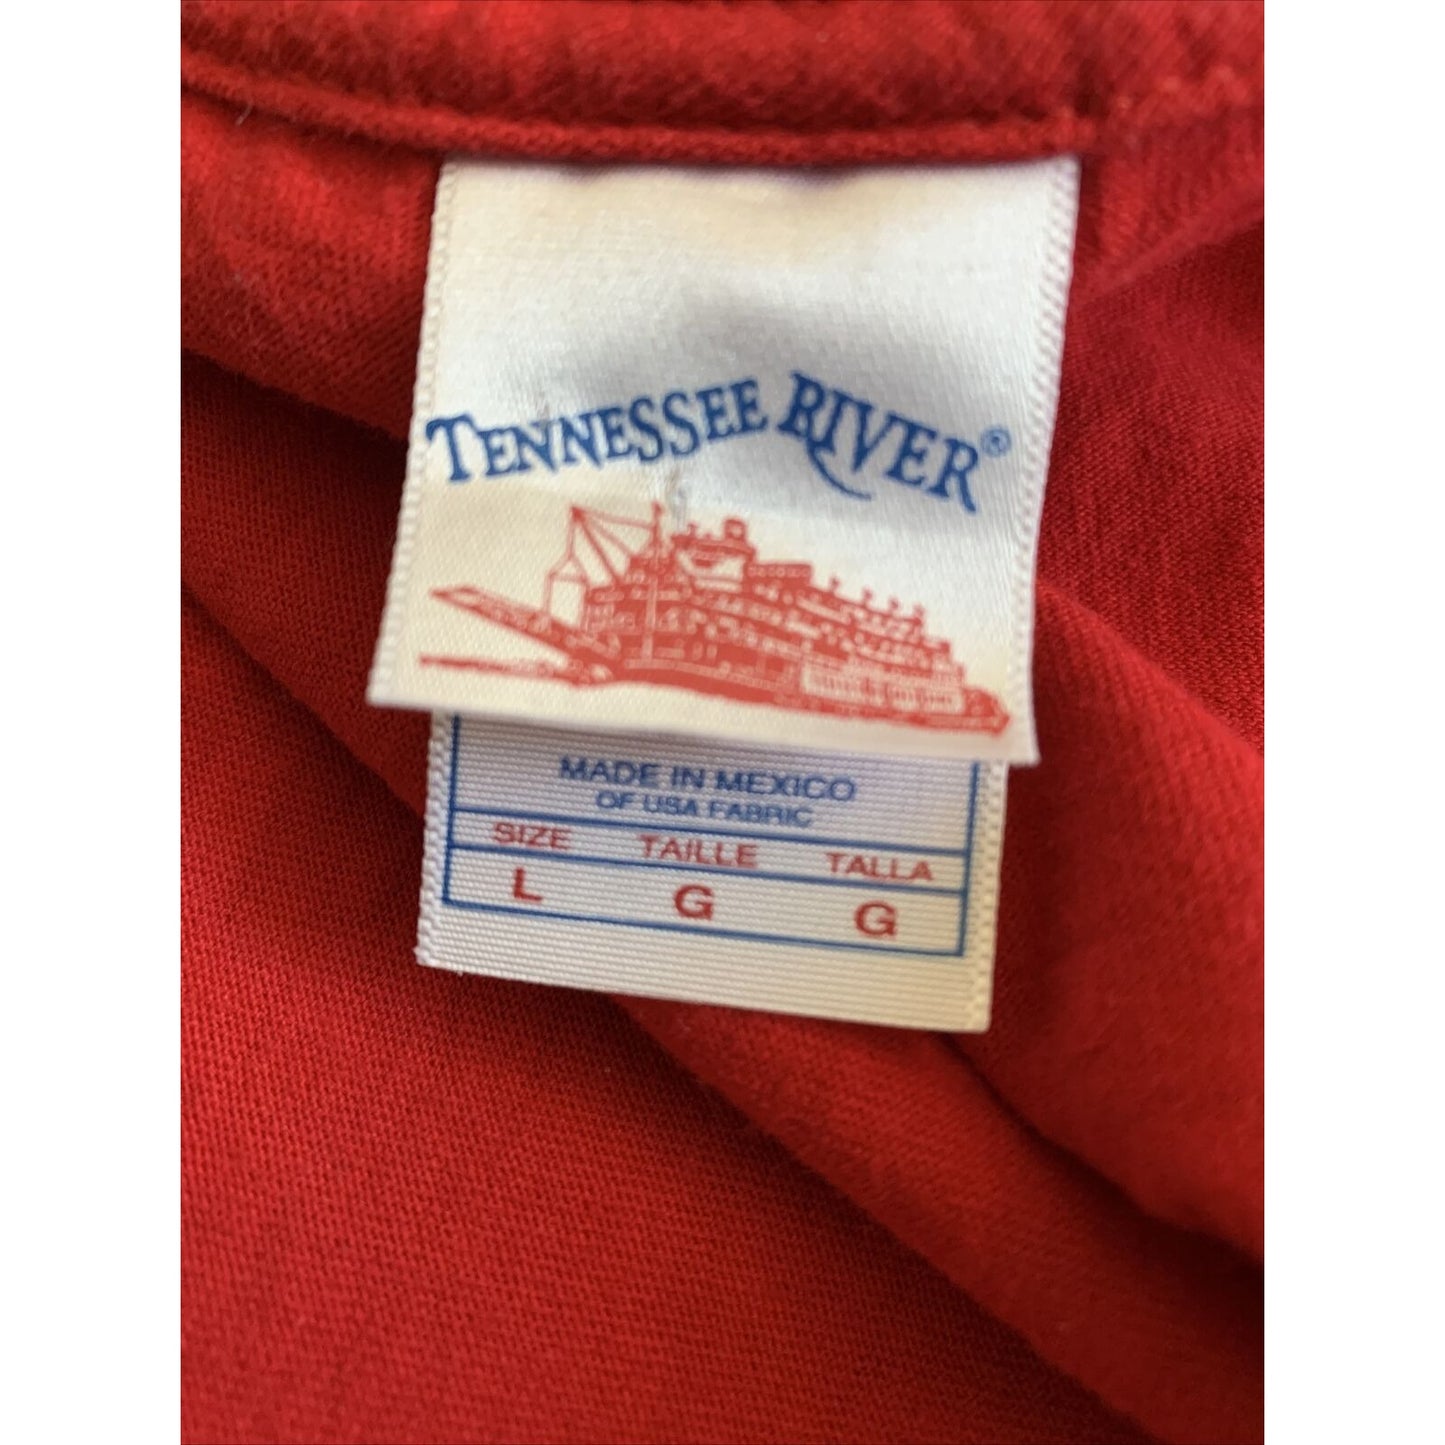 Men's TENNESSEE RIVER XL Large Red United We Stand USA SS T-Shirt